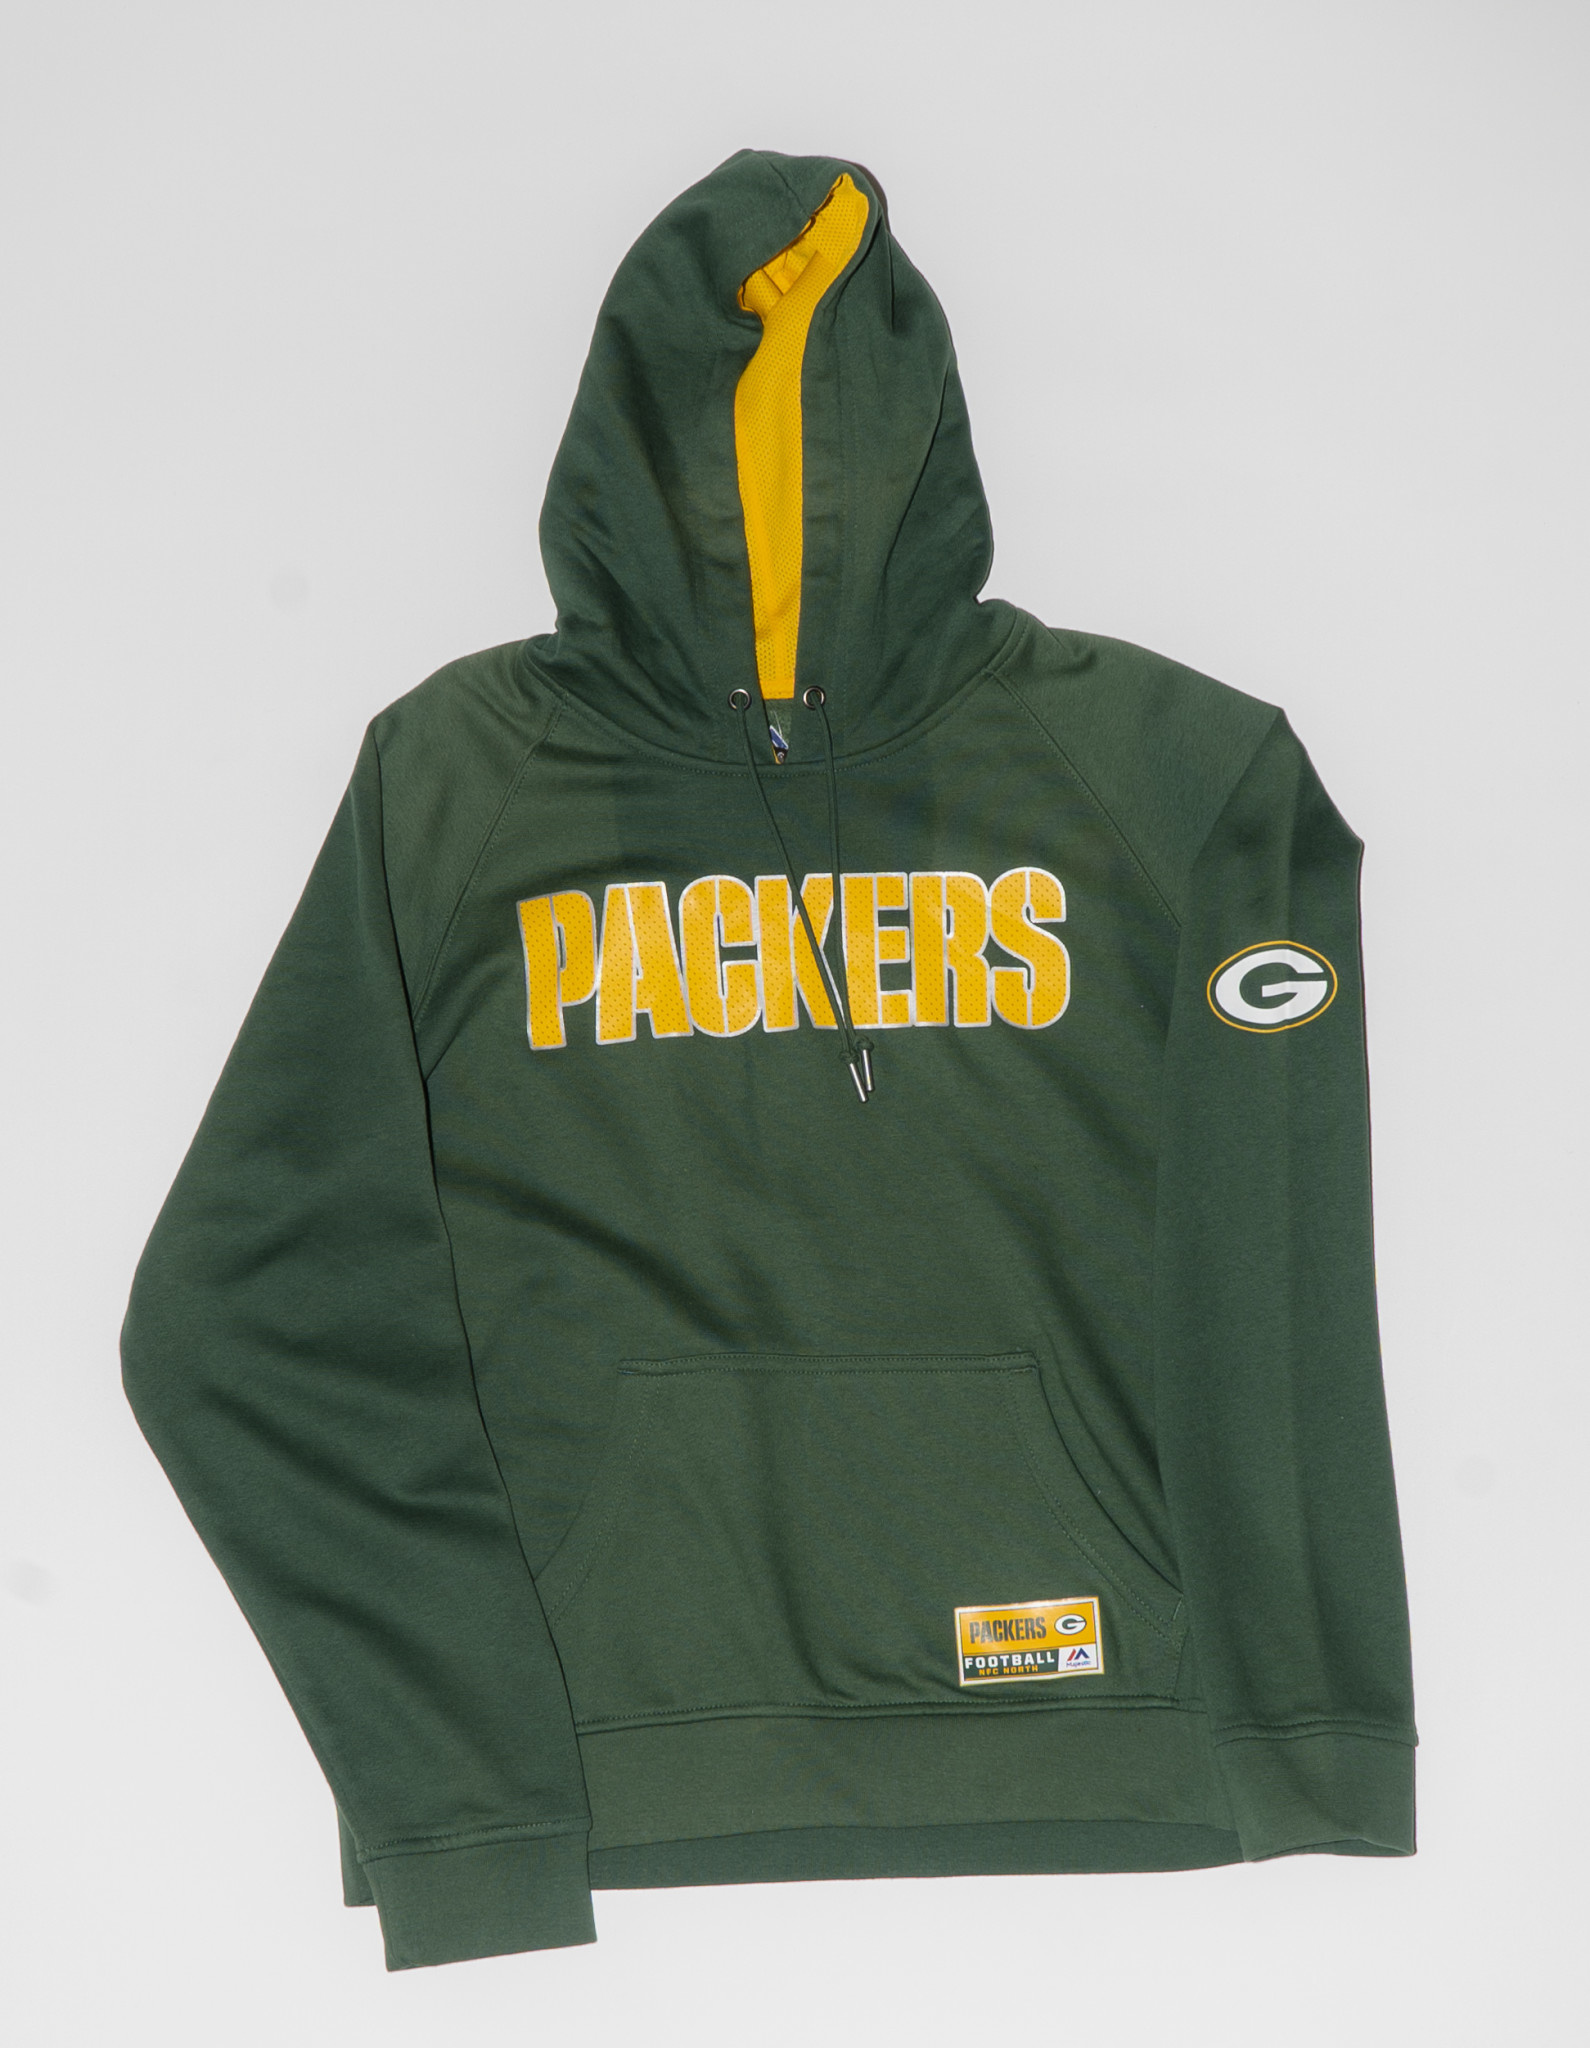 Packers Championship hoodie - Pre Game